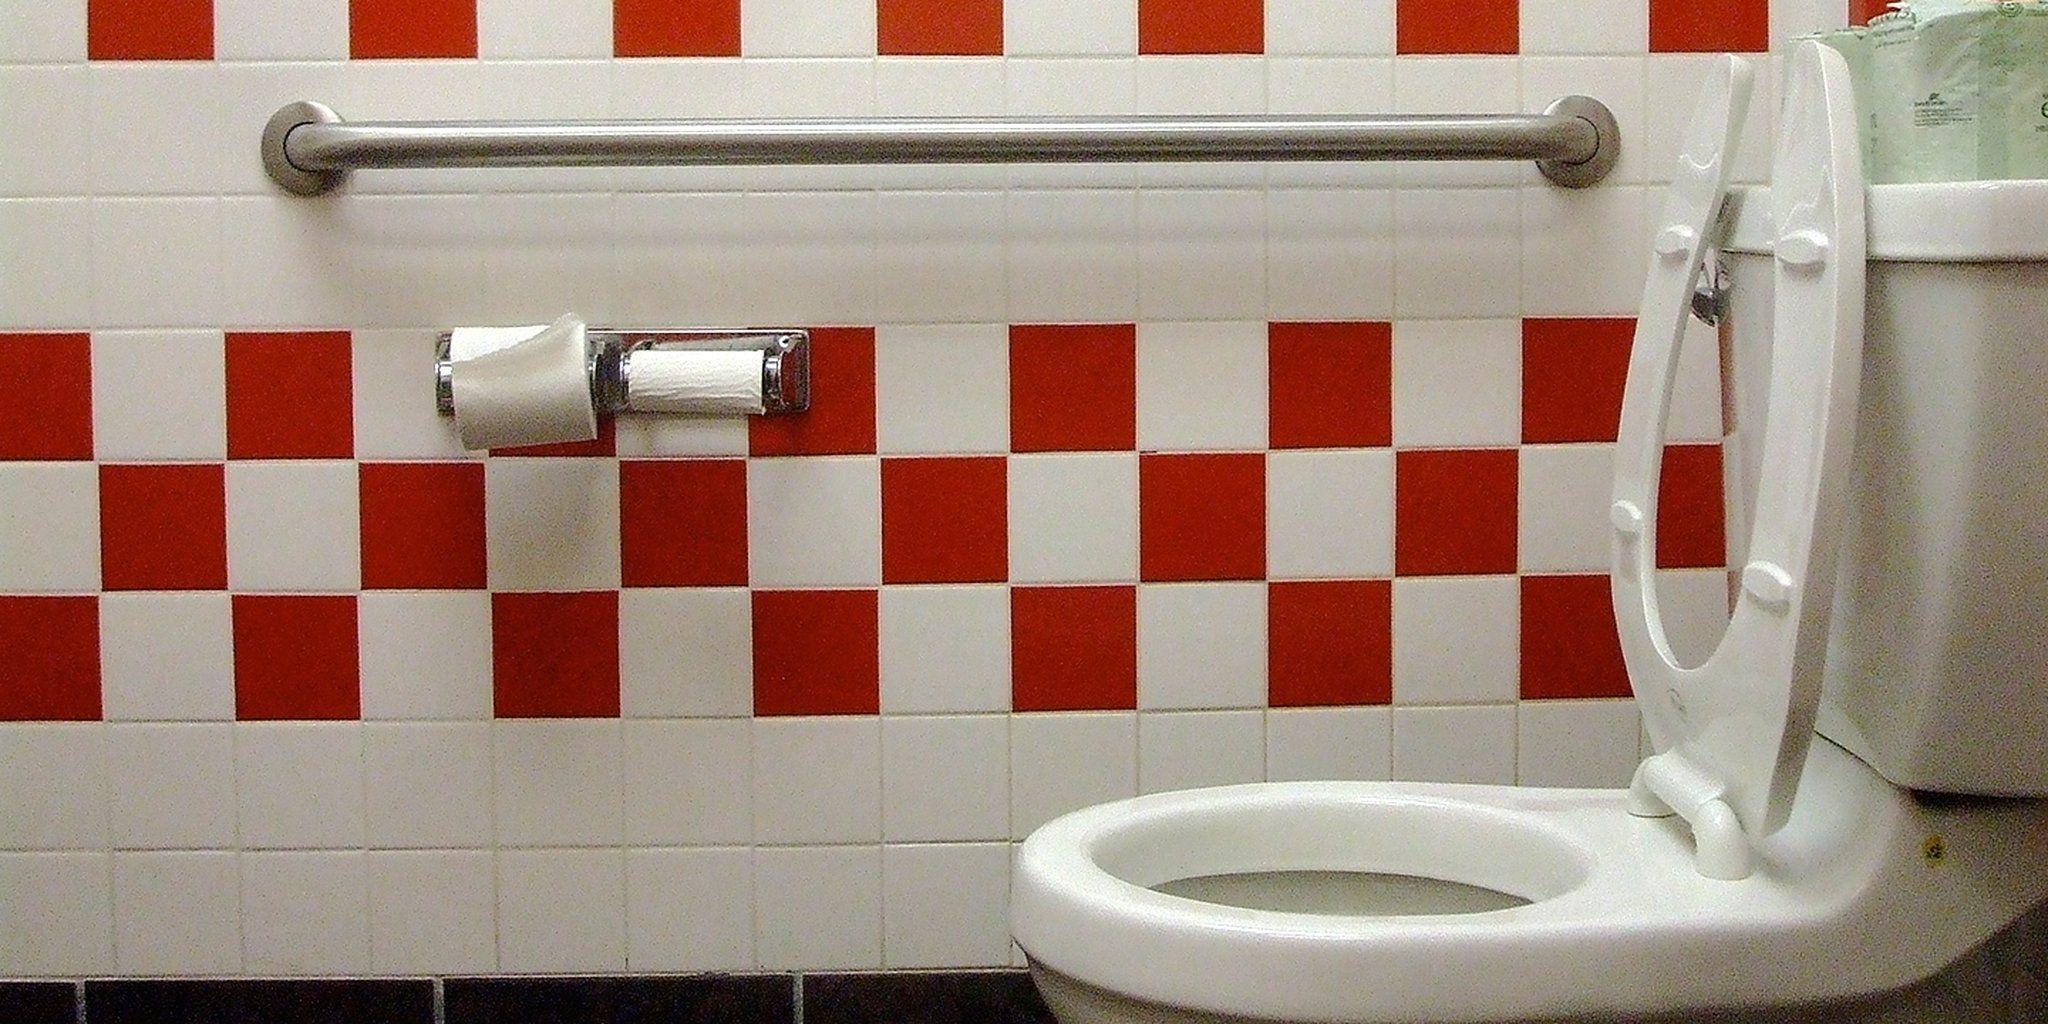 Officer reccomend Bathroom hell peeing potty toilet